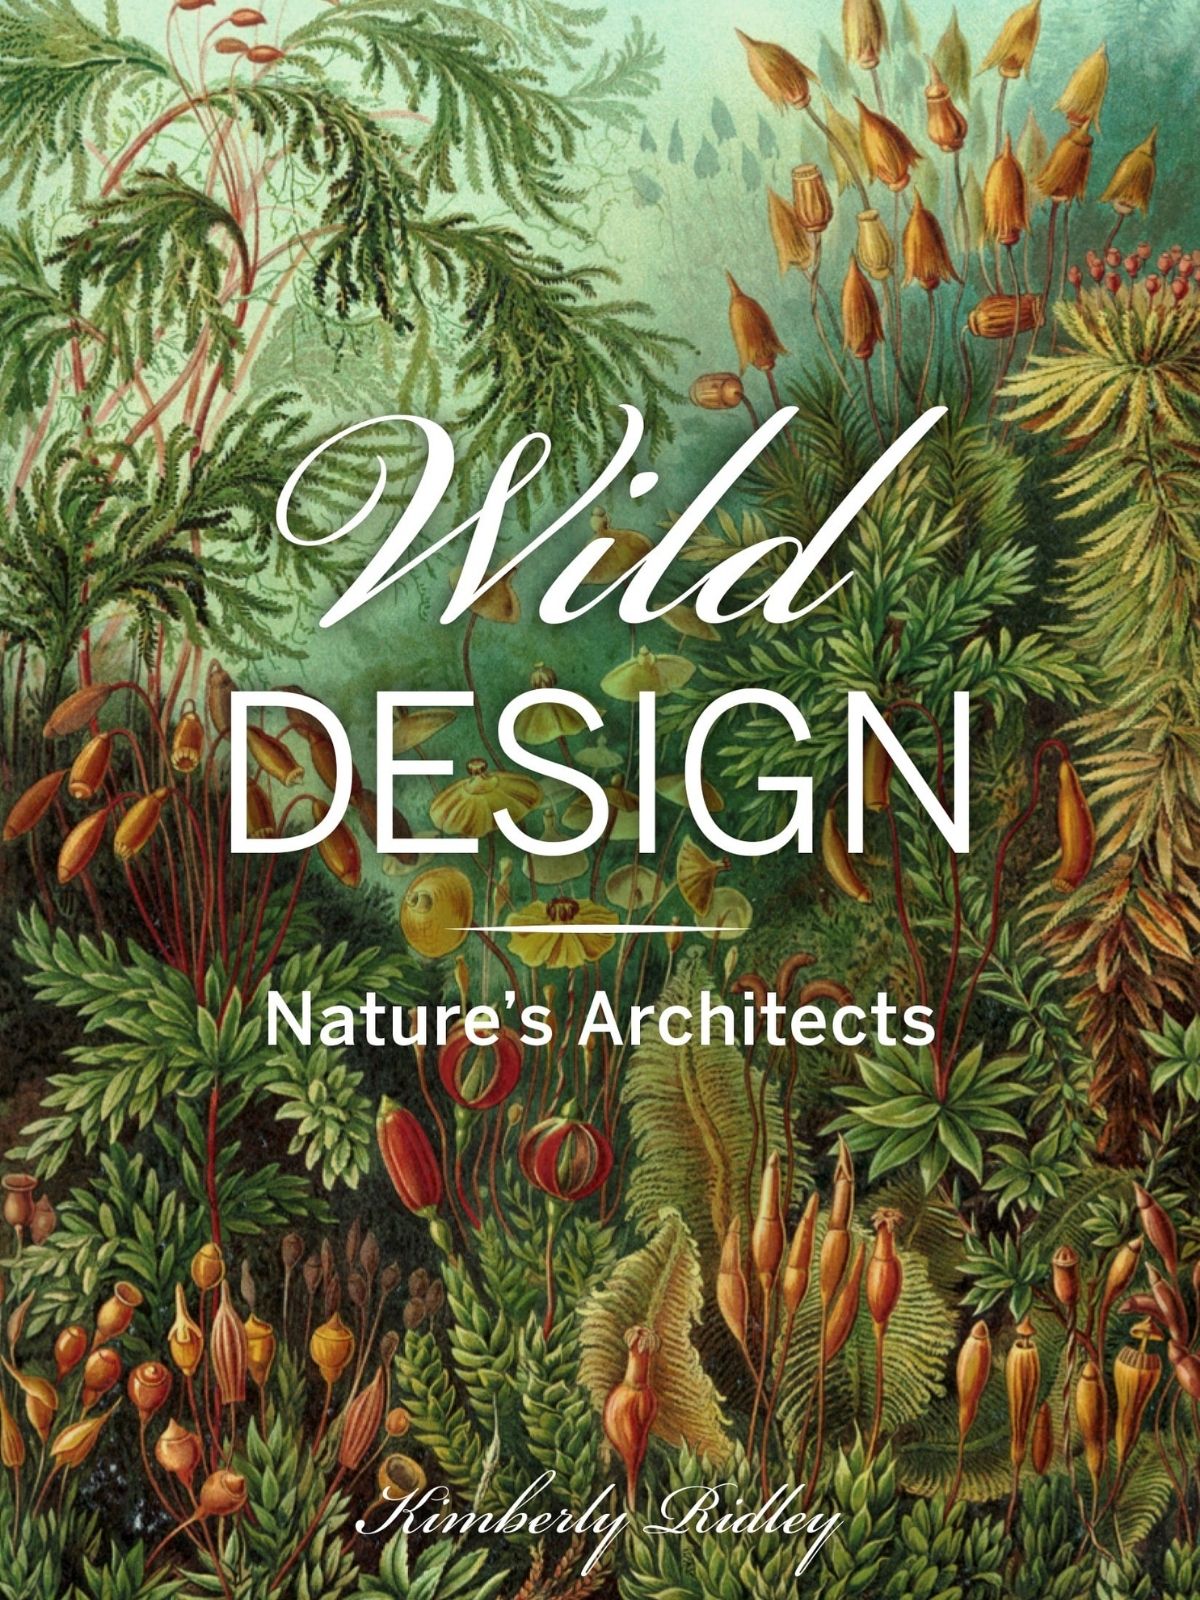 Lose Yourself in these Mesmerizing Vintage Illustrations of the Natural World - wild design - kimberley ridley on thursd